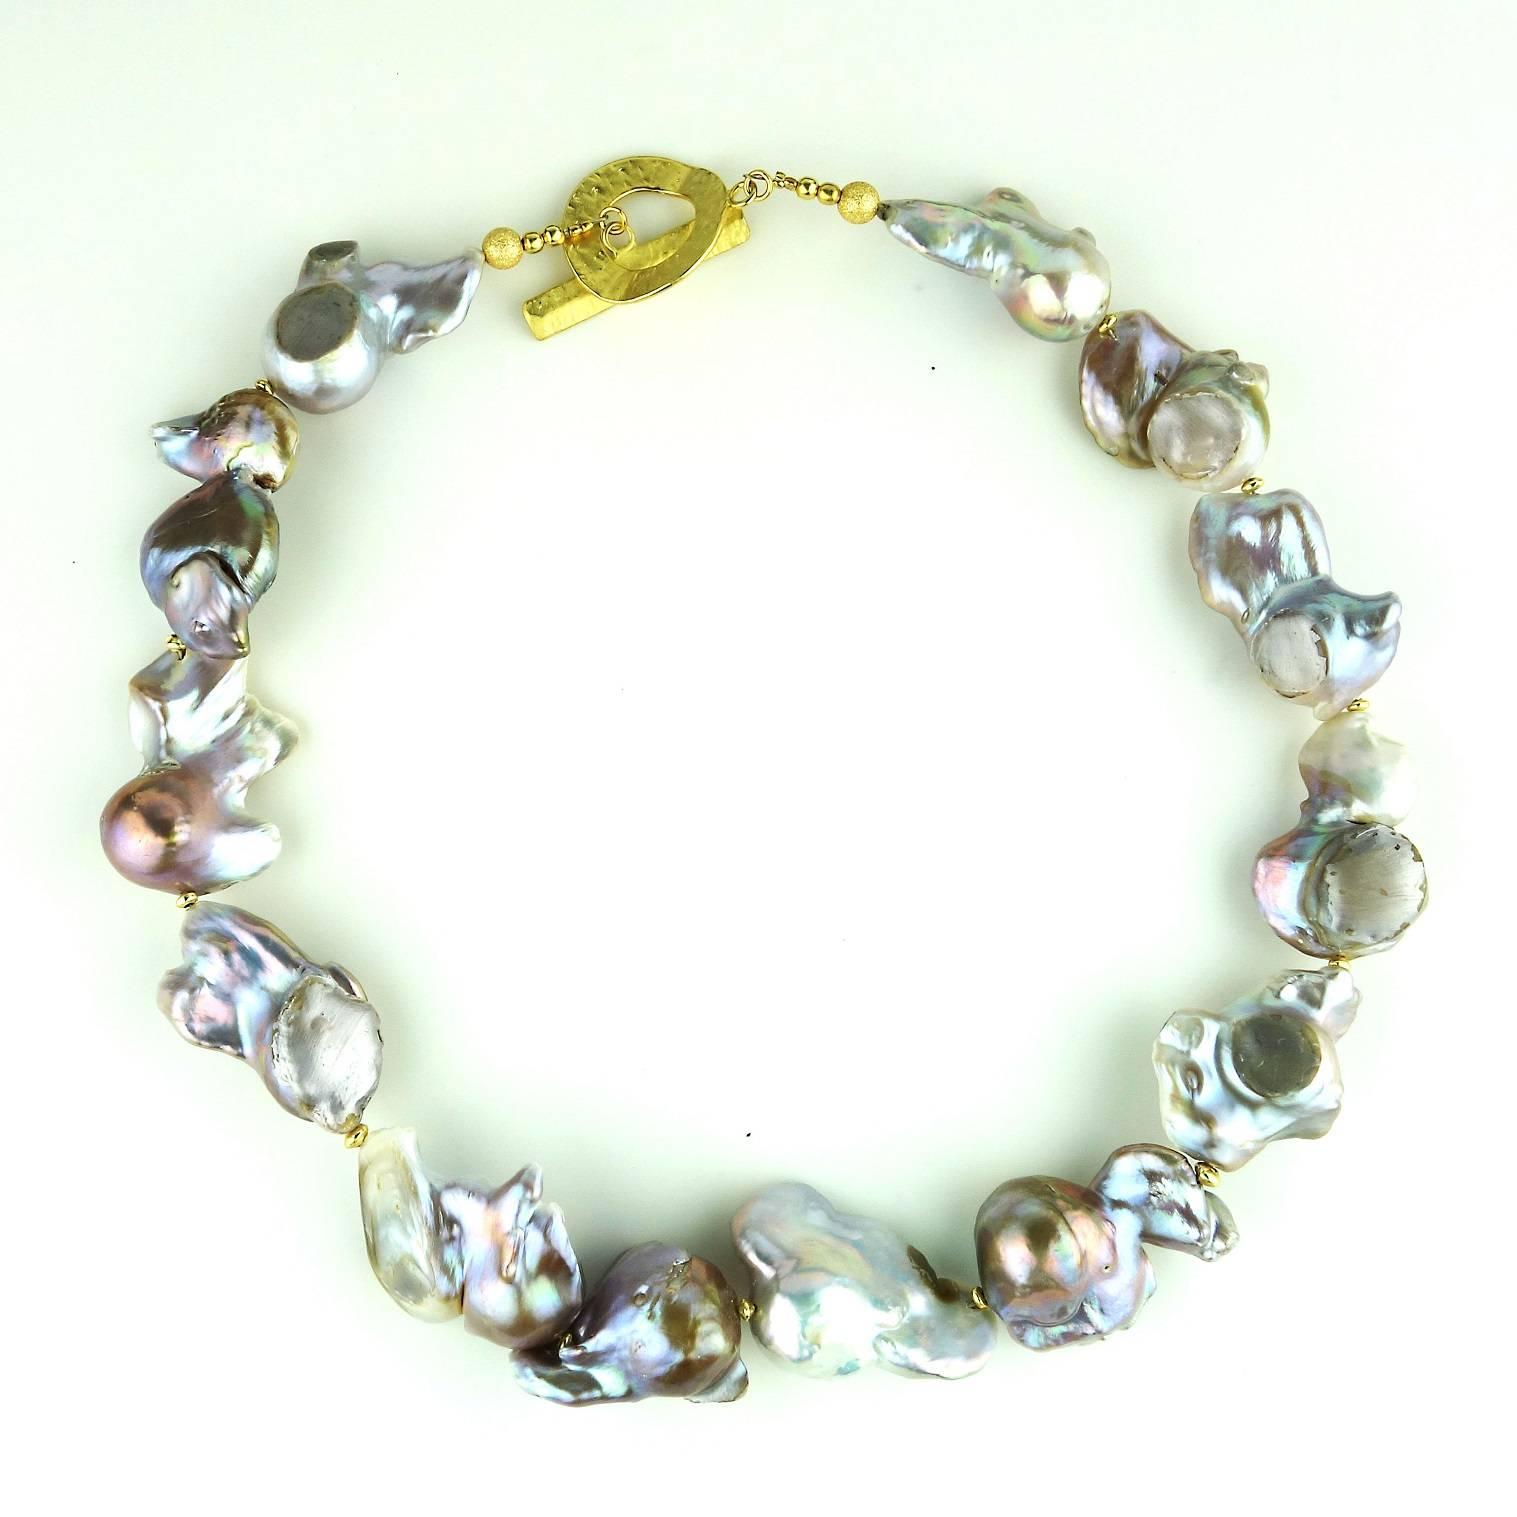 Gorgeous, large, silver Baroque Pearl necklace. These Baroque Pearls are unique in color and shape, each is a gem on its own. They iridesce in shades of pink, green and a touch of bronze.  The largest pearl measures 32x26MM.  The necklace measures